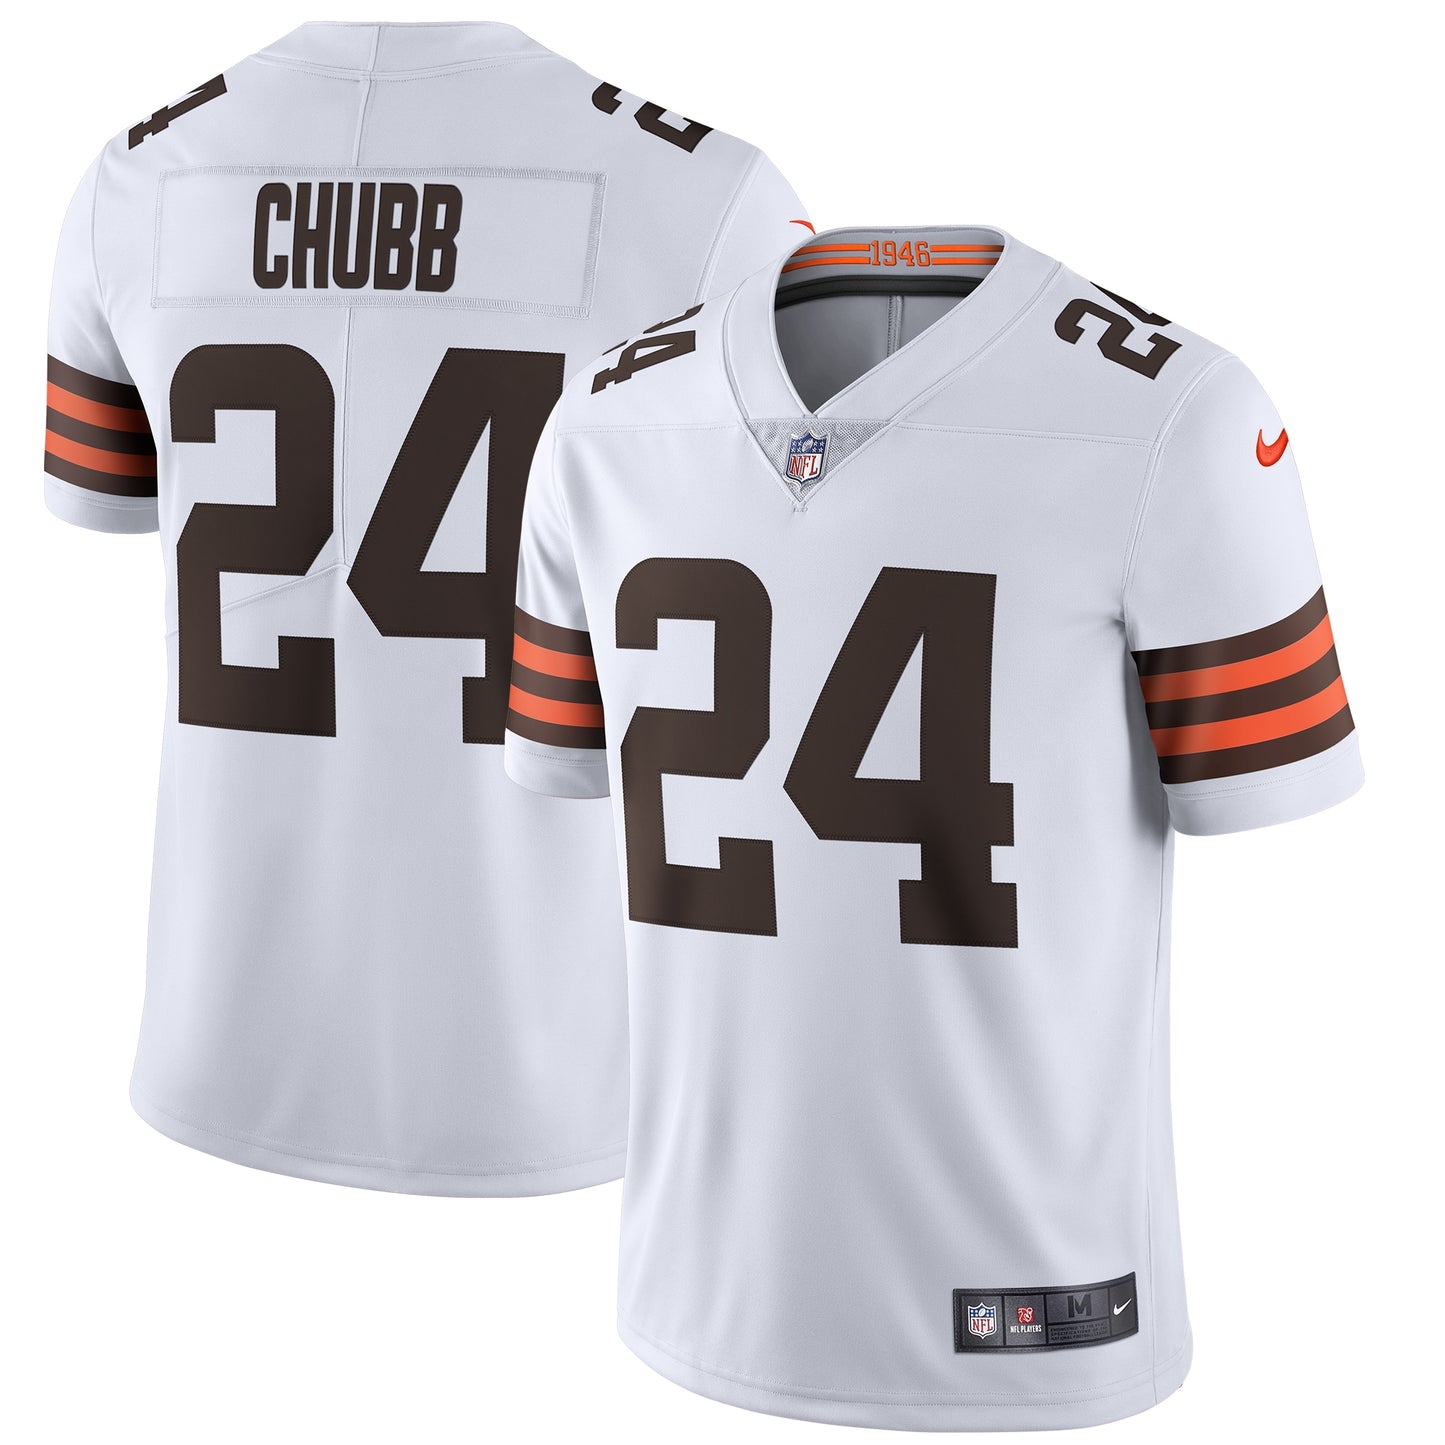 Nick Chubb Cleveland Browns Nike Vapor Limited Jersey - White